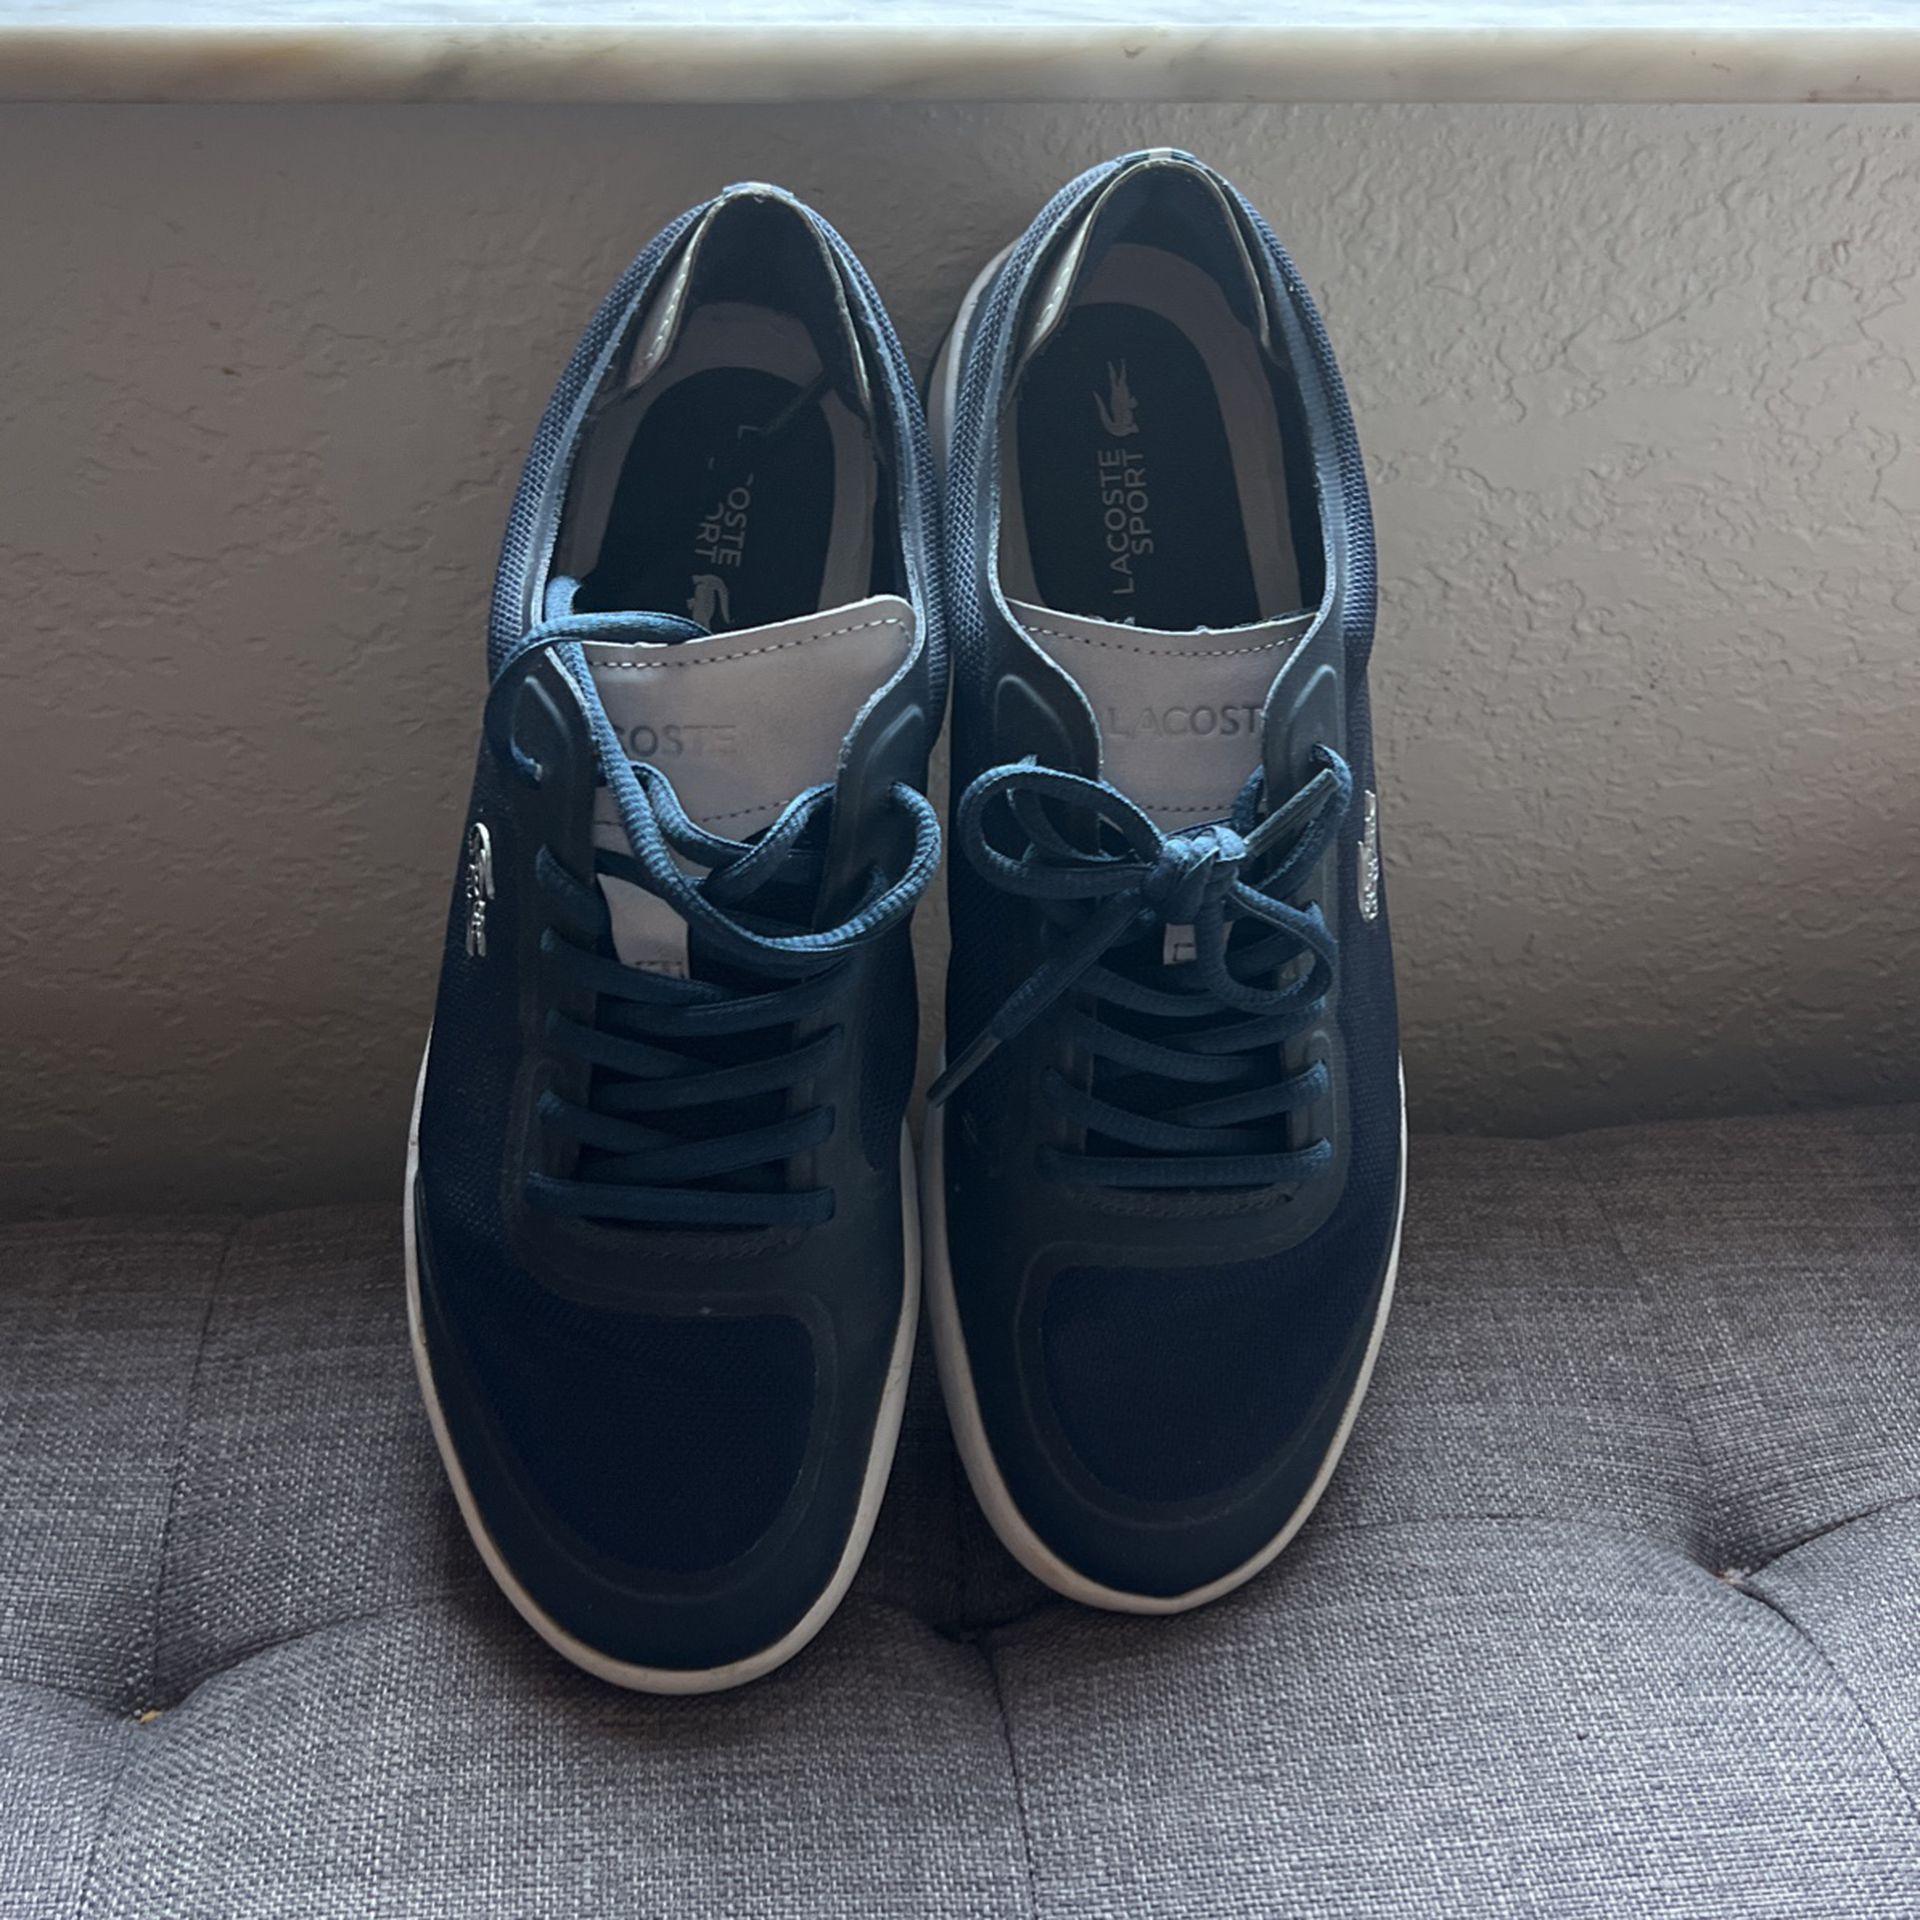 Lacoste Sneakers Excellent Condition ! for Sale in Boca Raton, FL - OfferUp